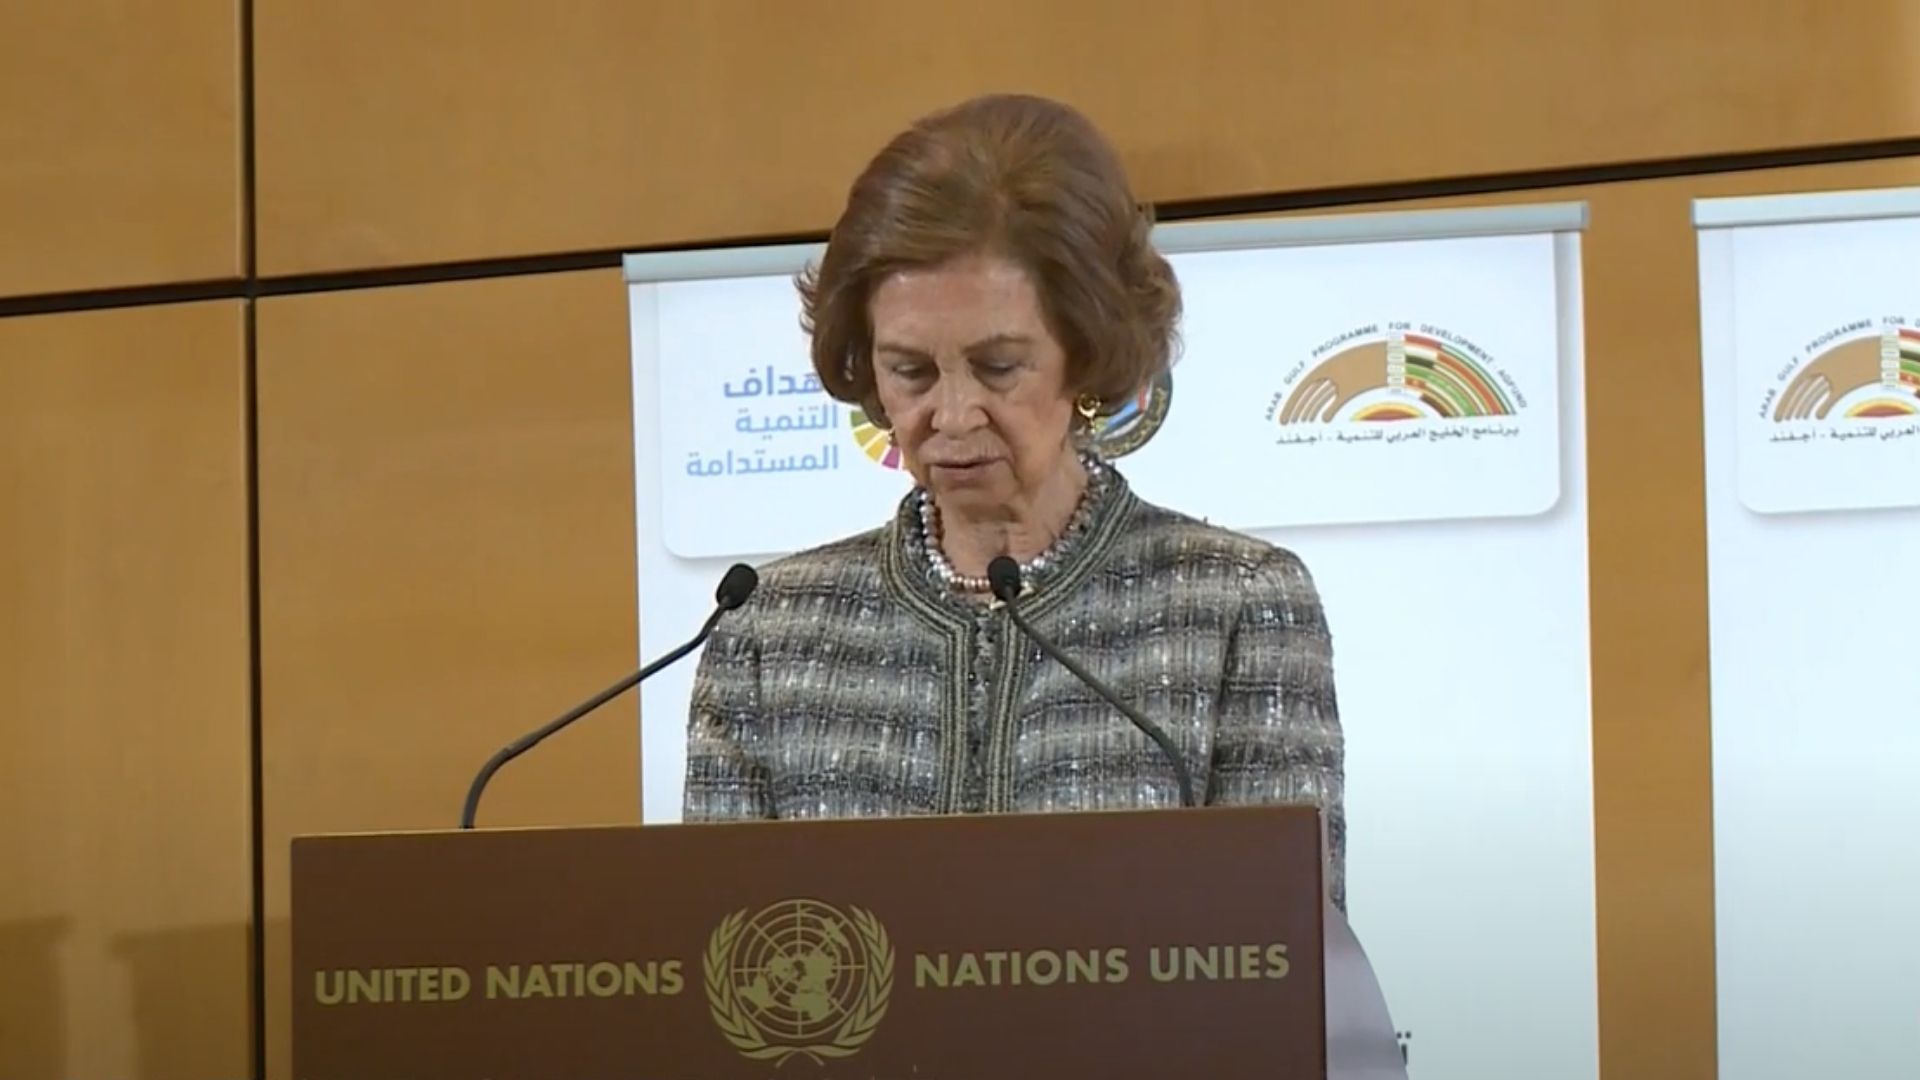 The Prize Committee Speech delivered by Her Majesty Queen Sofia at the 19th AGFUND Prize Ceremony